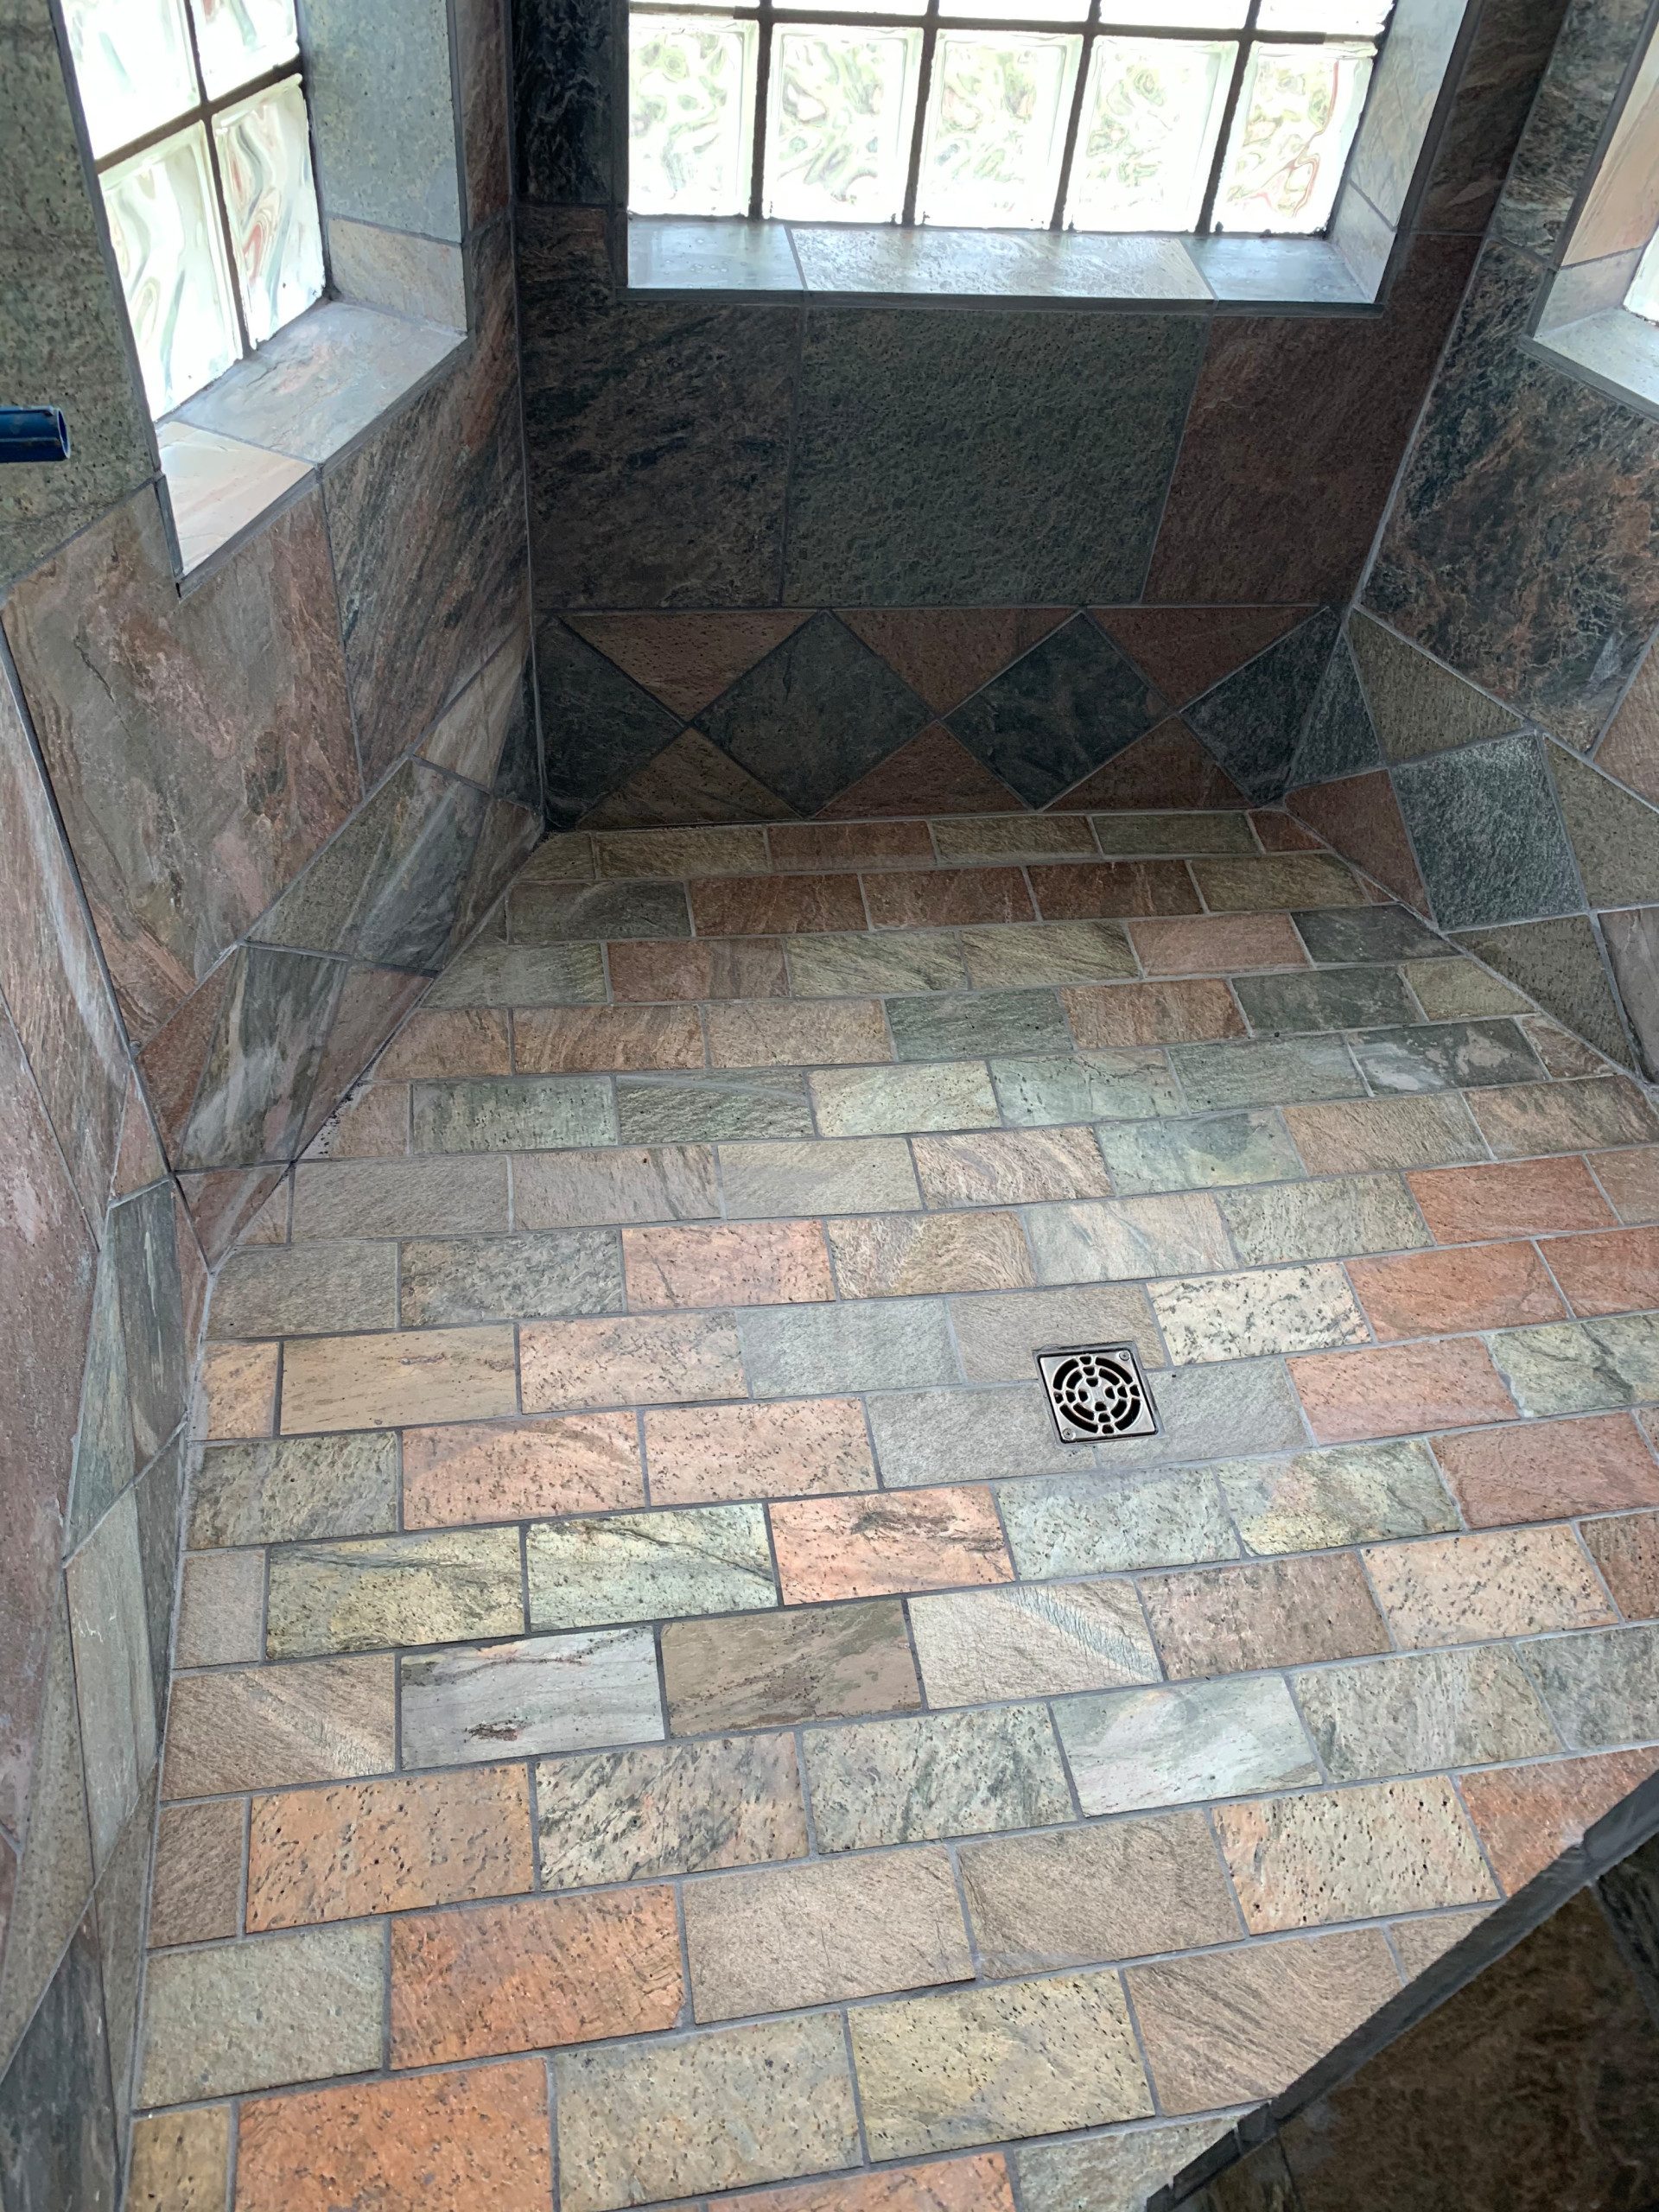 Stone tile walk in shower with rain head and body misters.